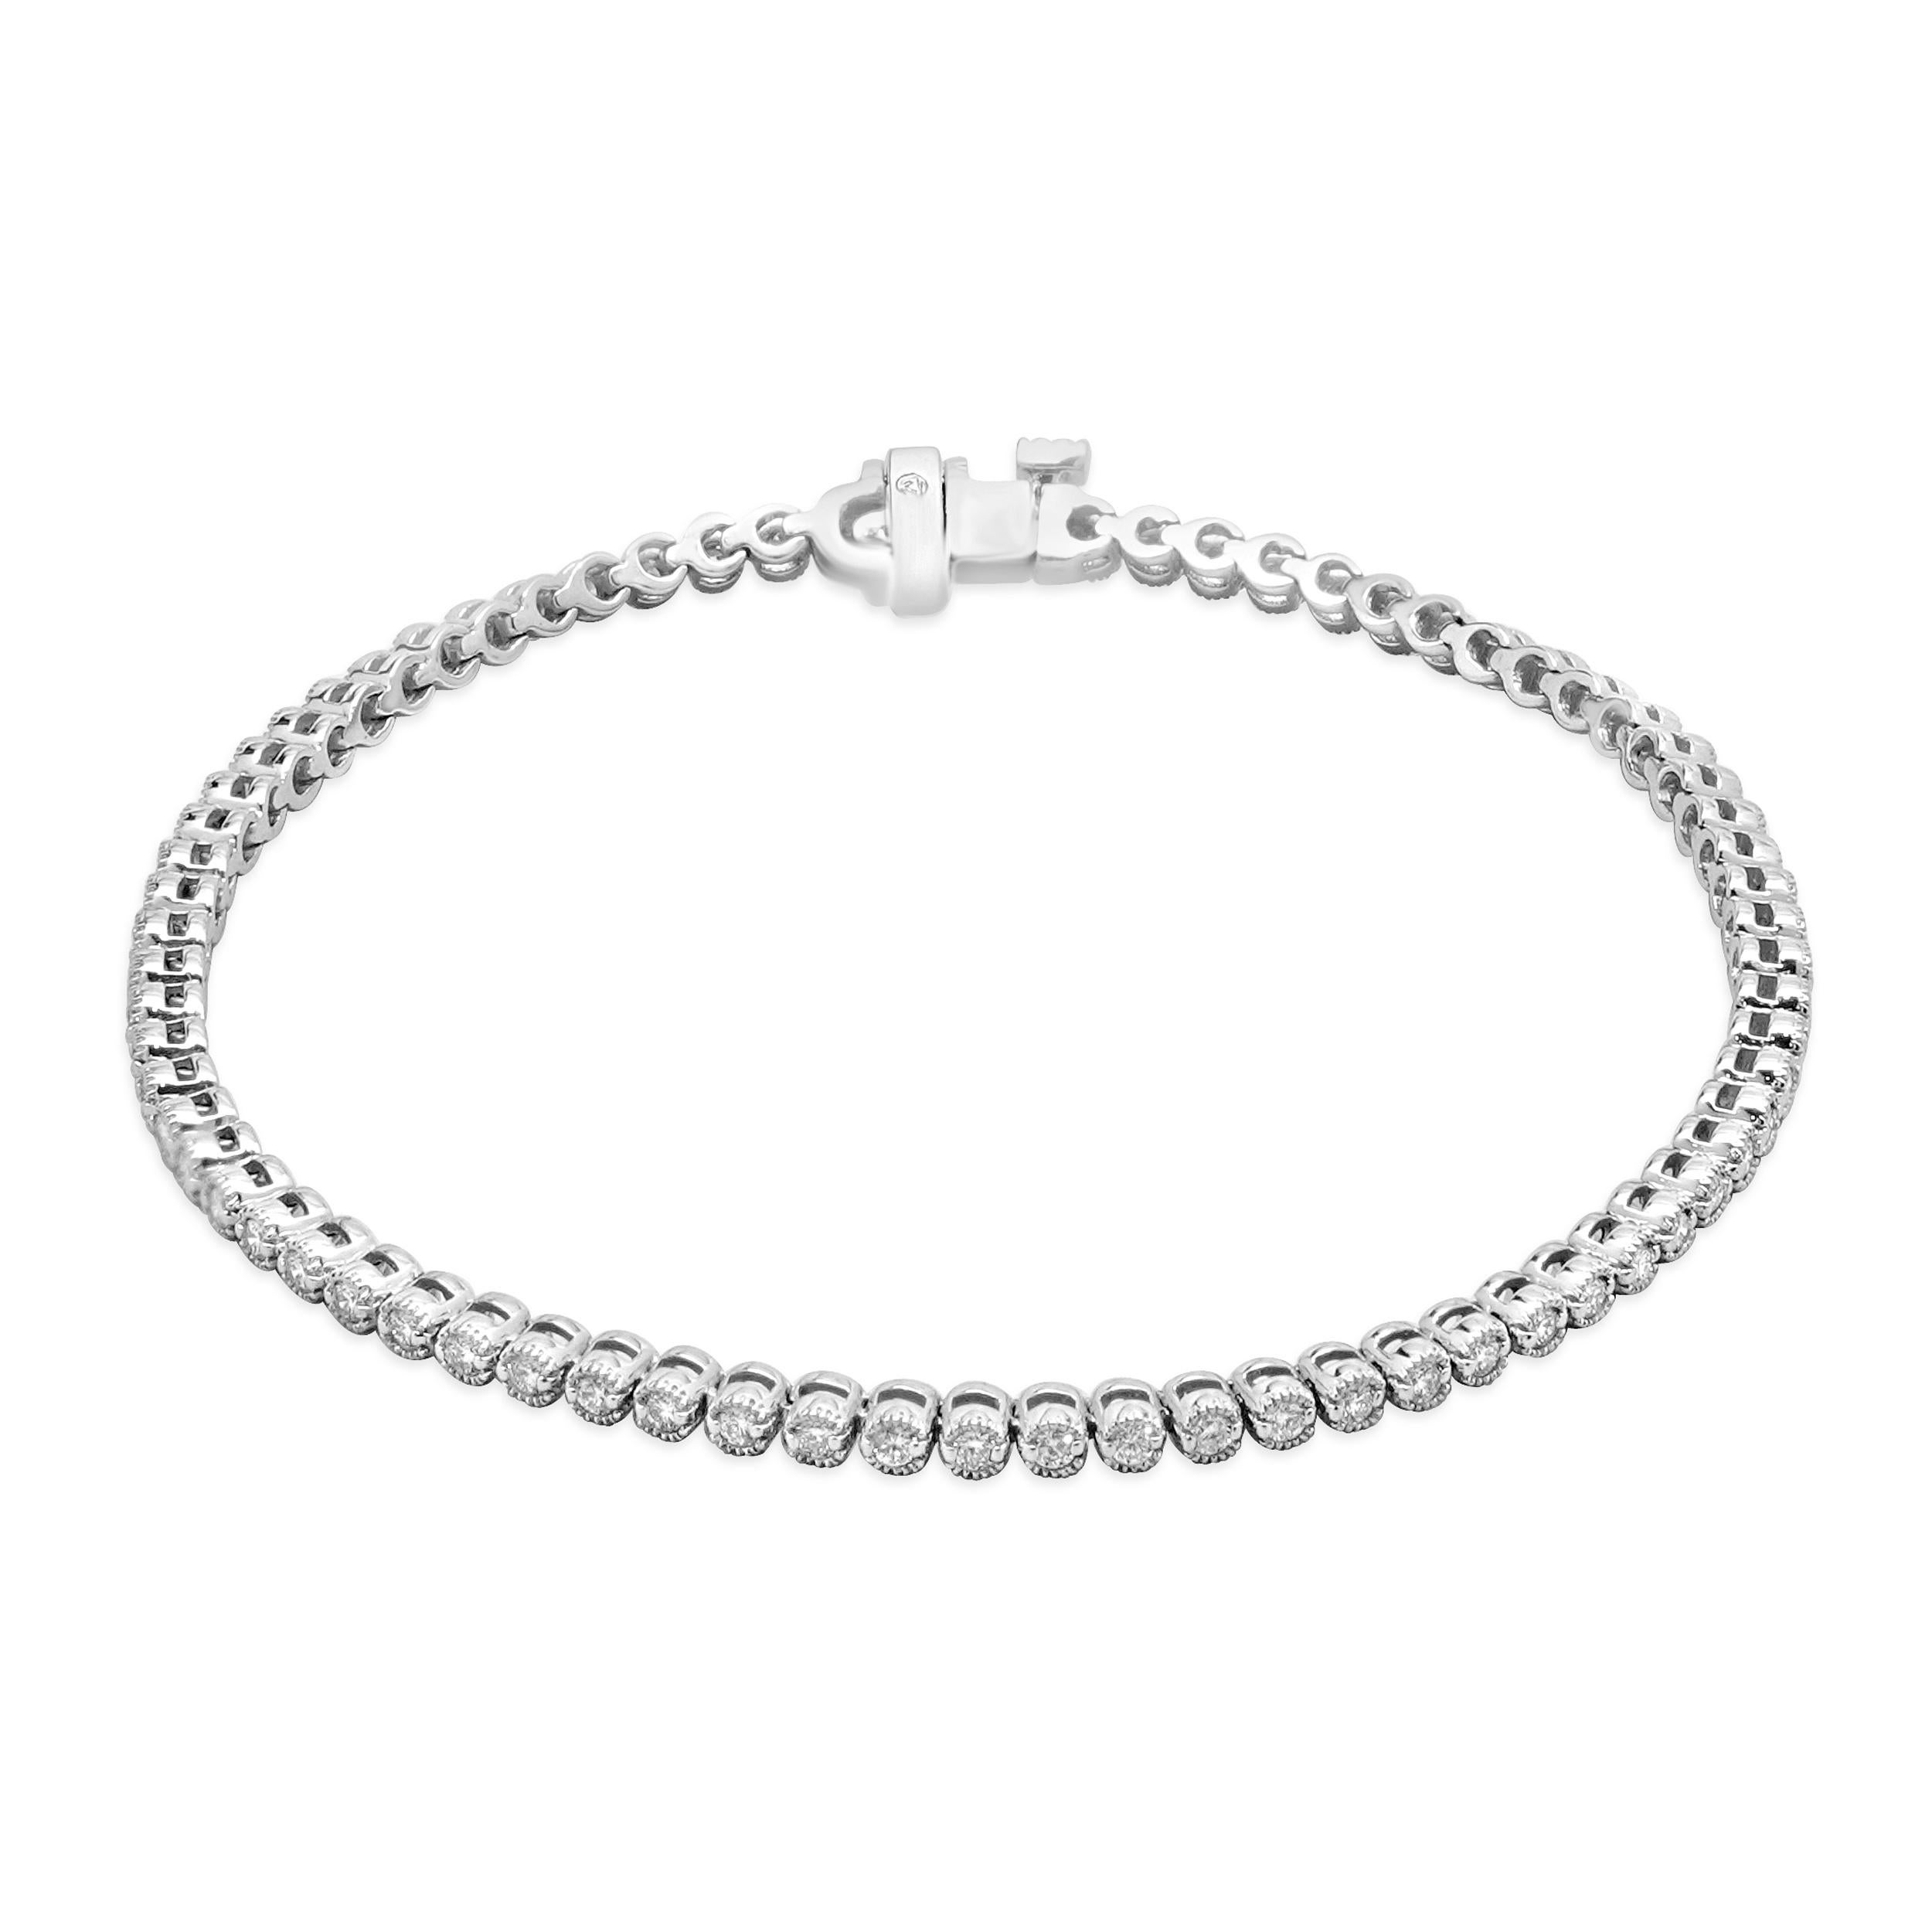 Designer: custom design
Material: 14K white gold
Diamond: 72 round brilliant cut = 1.00cttw
Color: G/H
Clarity: VS-SI1
Dimensions: bracelet will fit up to a 7-inch wrist
Weight: 7.03 grams
